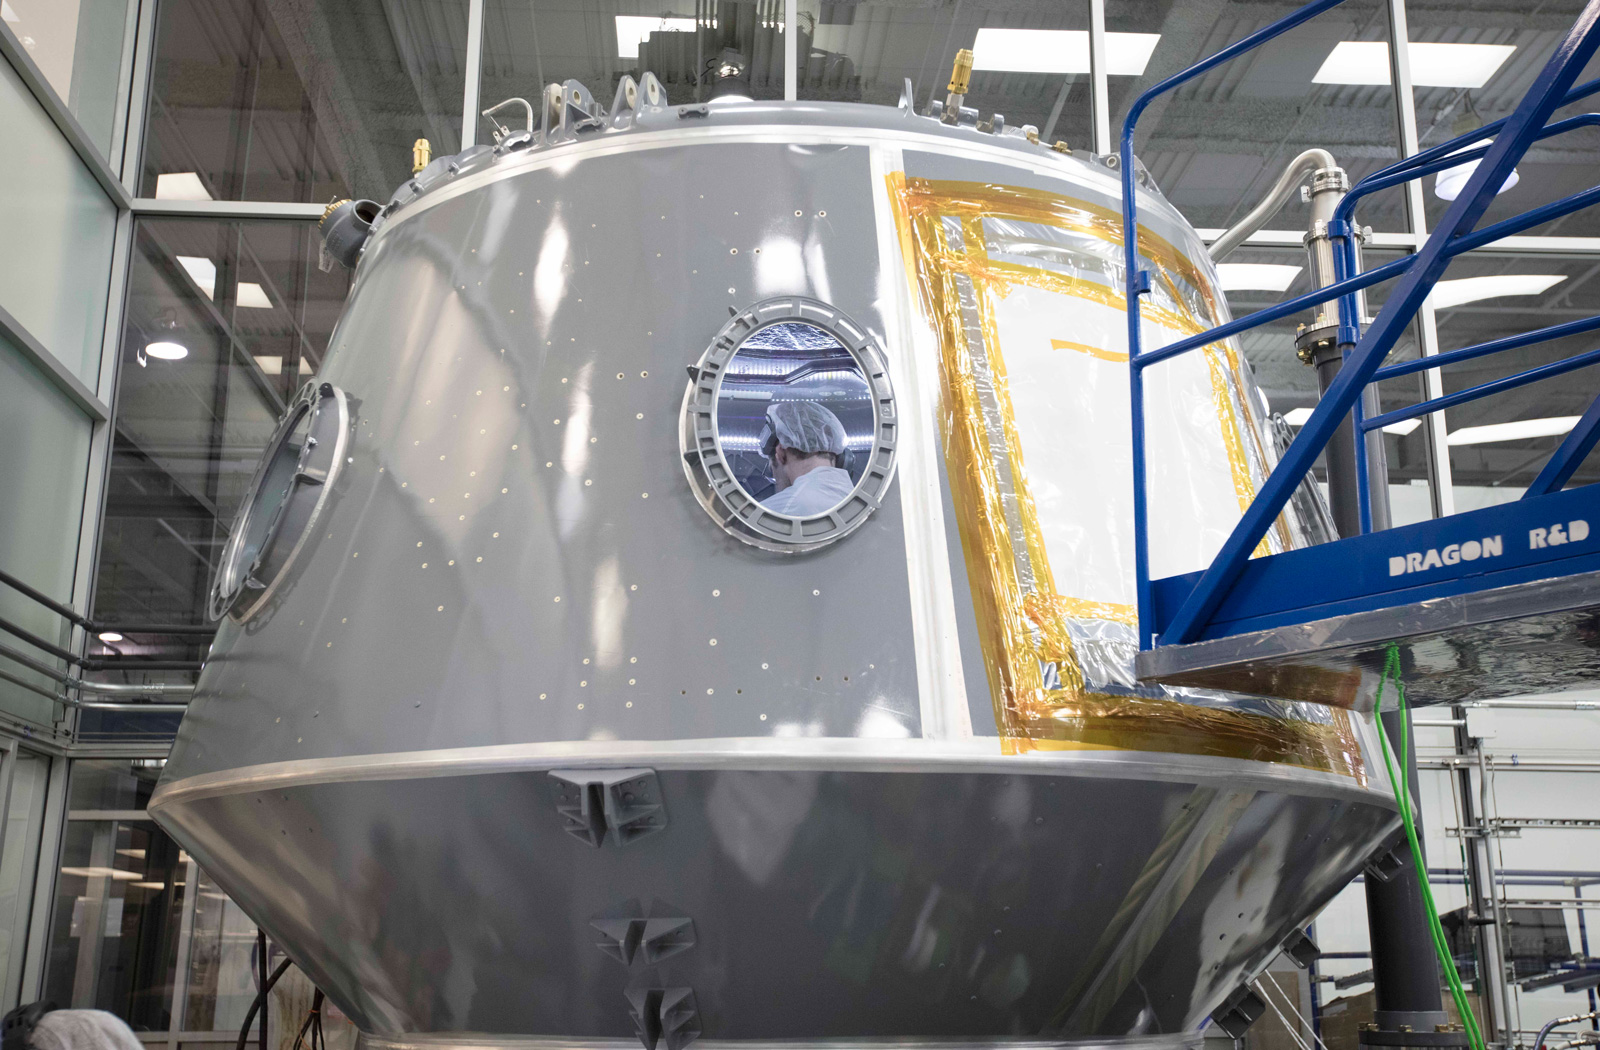 SpaceX's test version of Crew Dragon